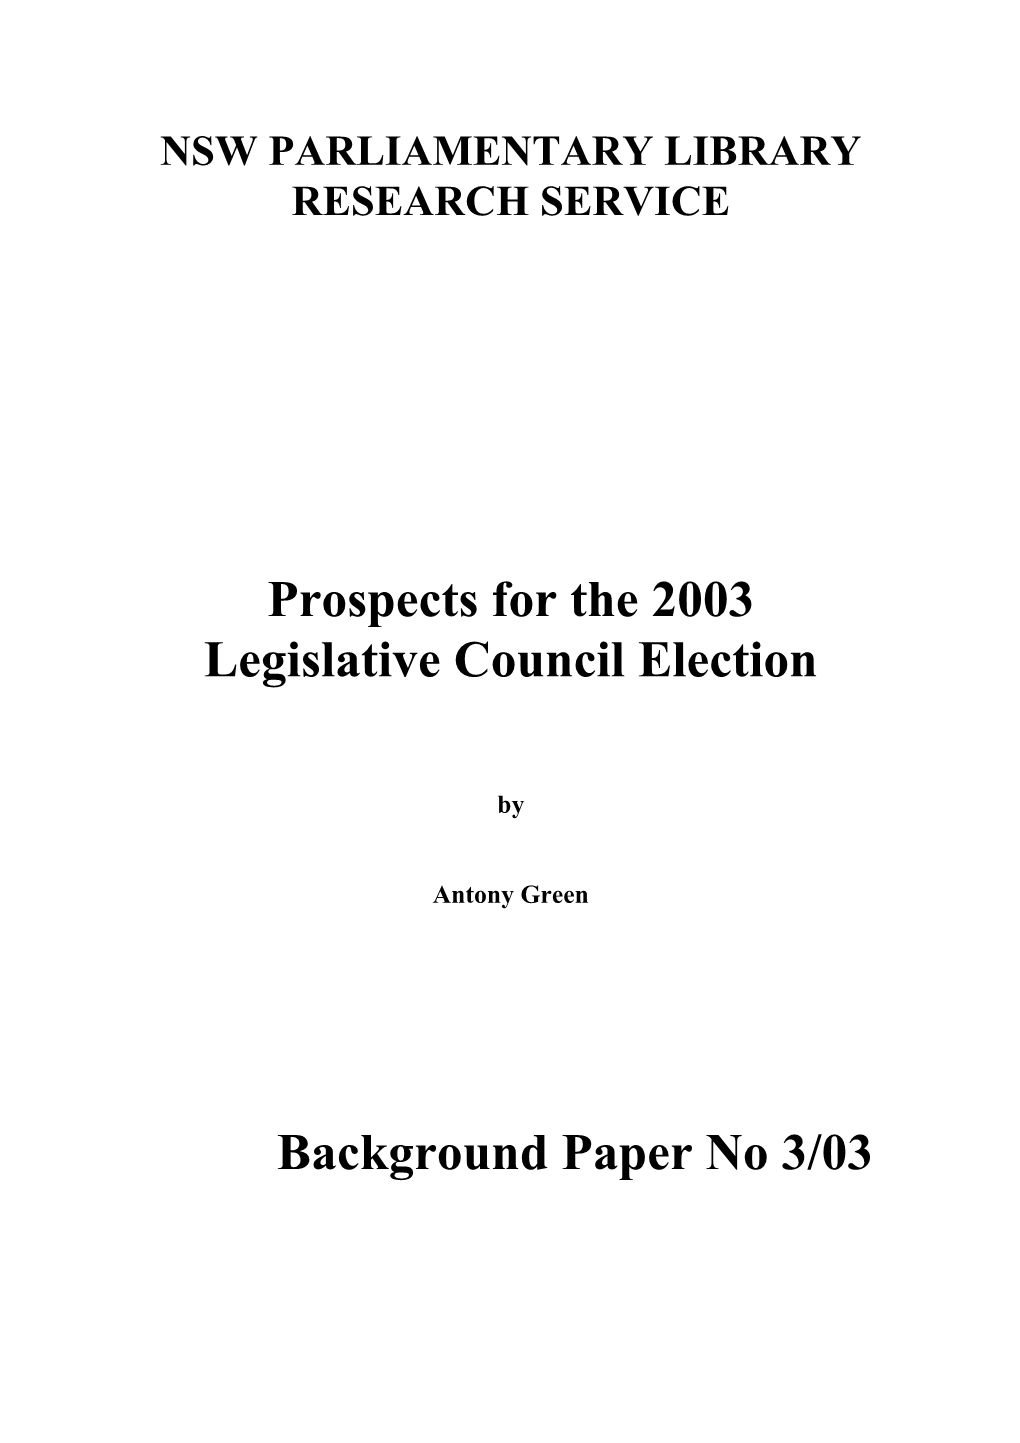 Prospects for the 2003 Legislative Council Election Background Paper